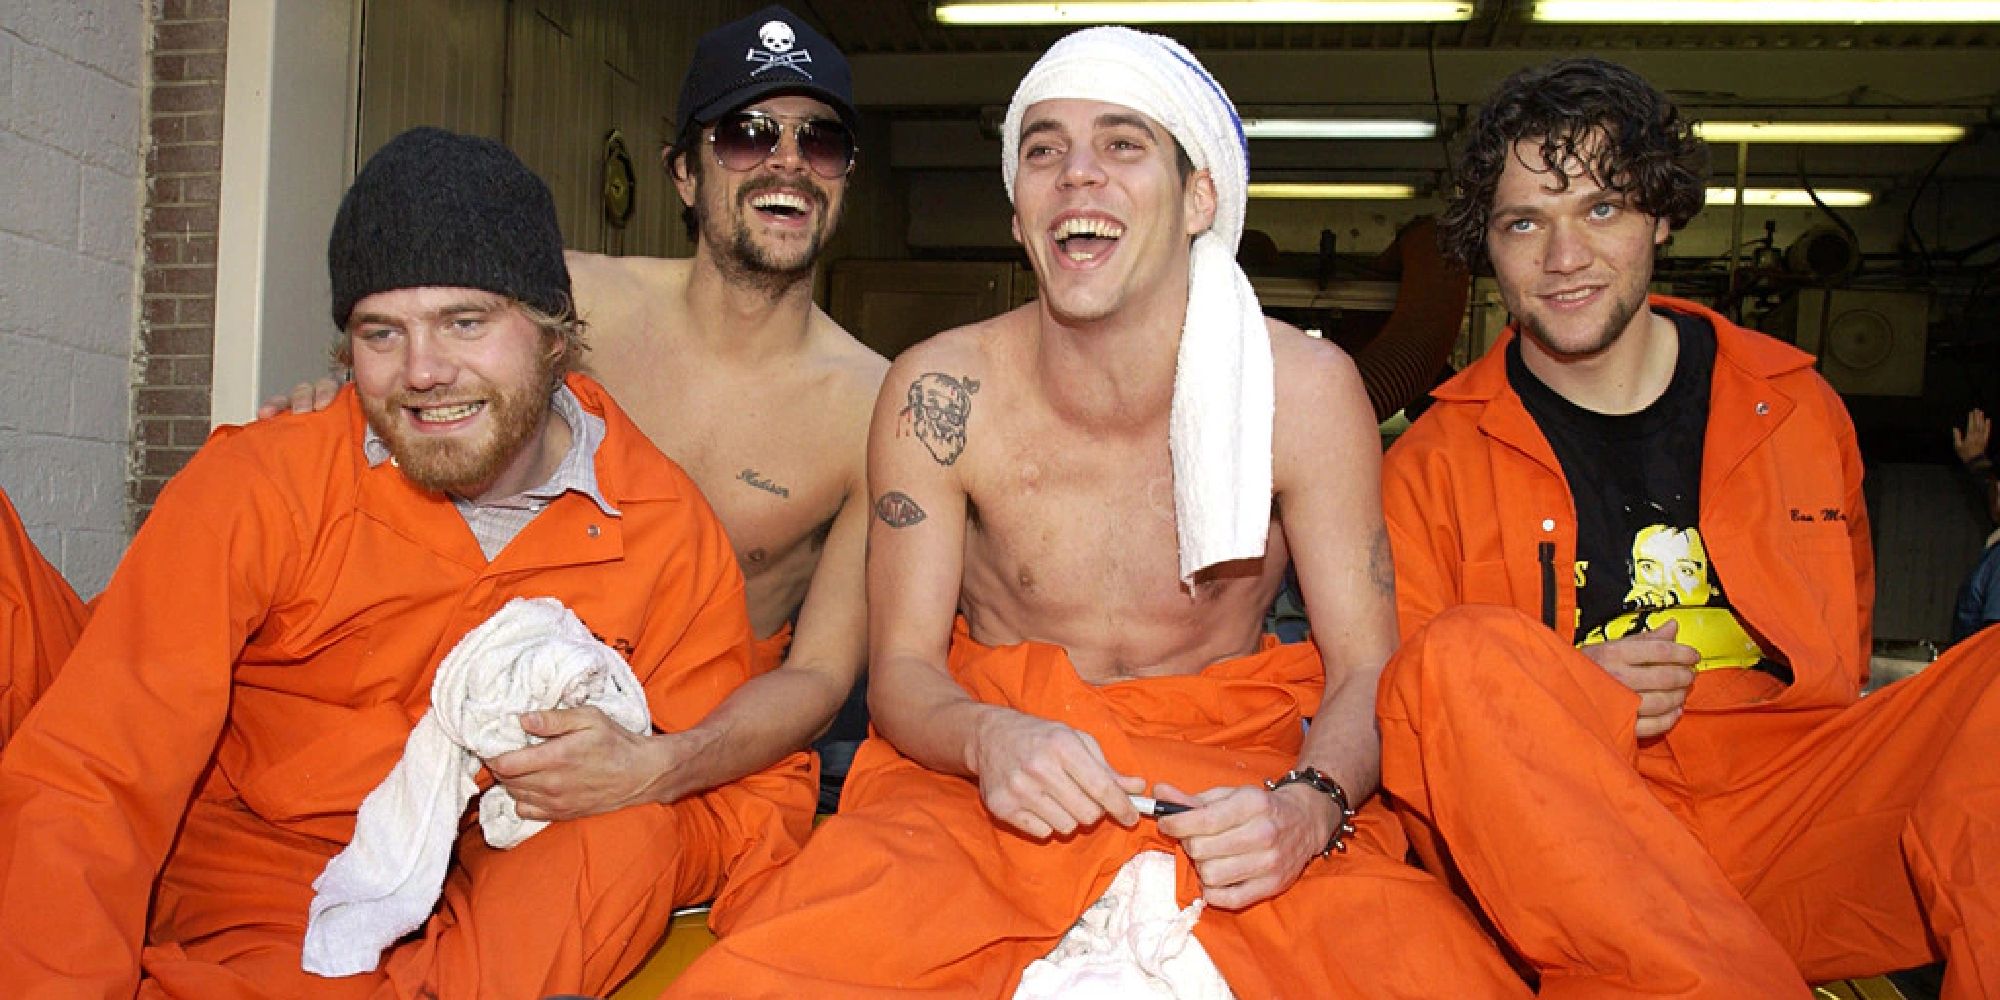 Steve-O, Johnny Knoxville, and cast laughing and wearing orange jumpsuits on Jackass